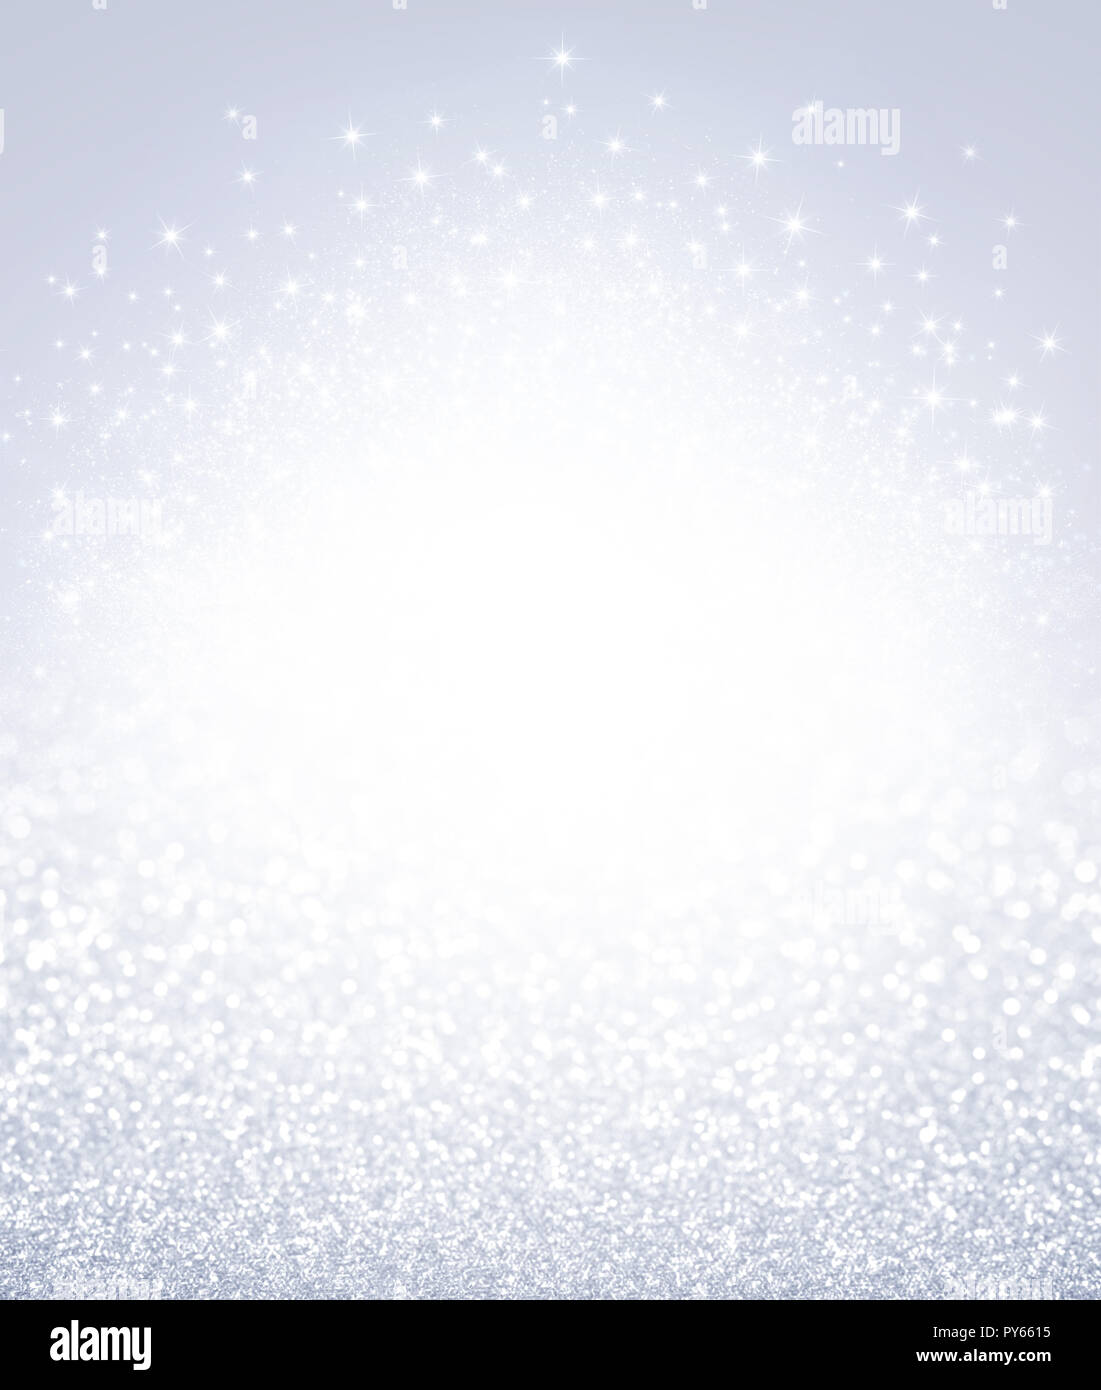 Glittering defocused silver background with shining stars exploding - Festive material Stock Photo